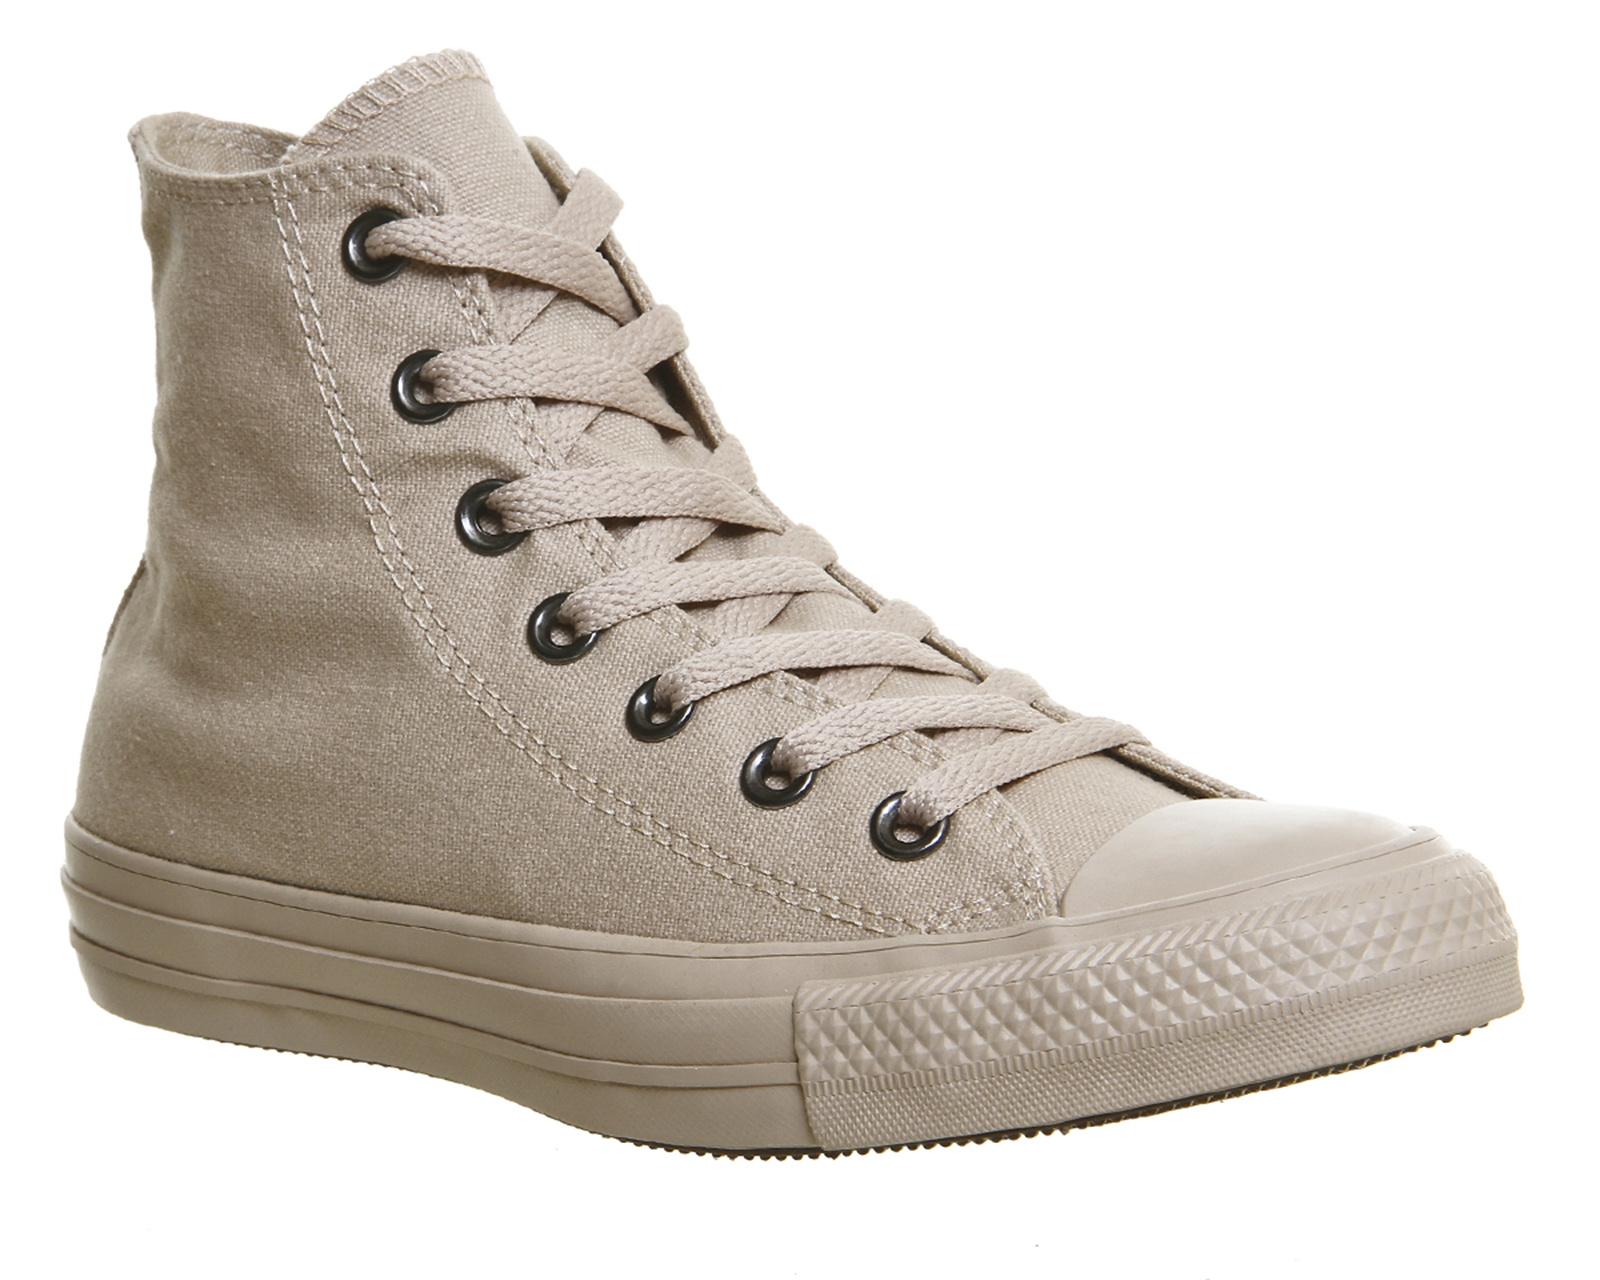 converse all star hi leather sand dollar rose gold exclusive